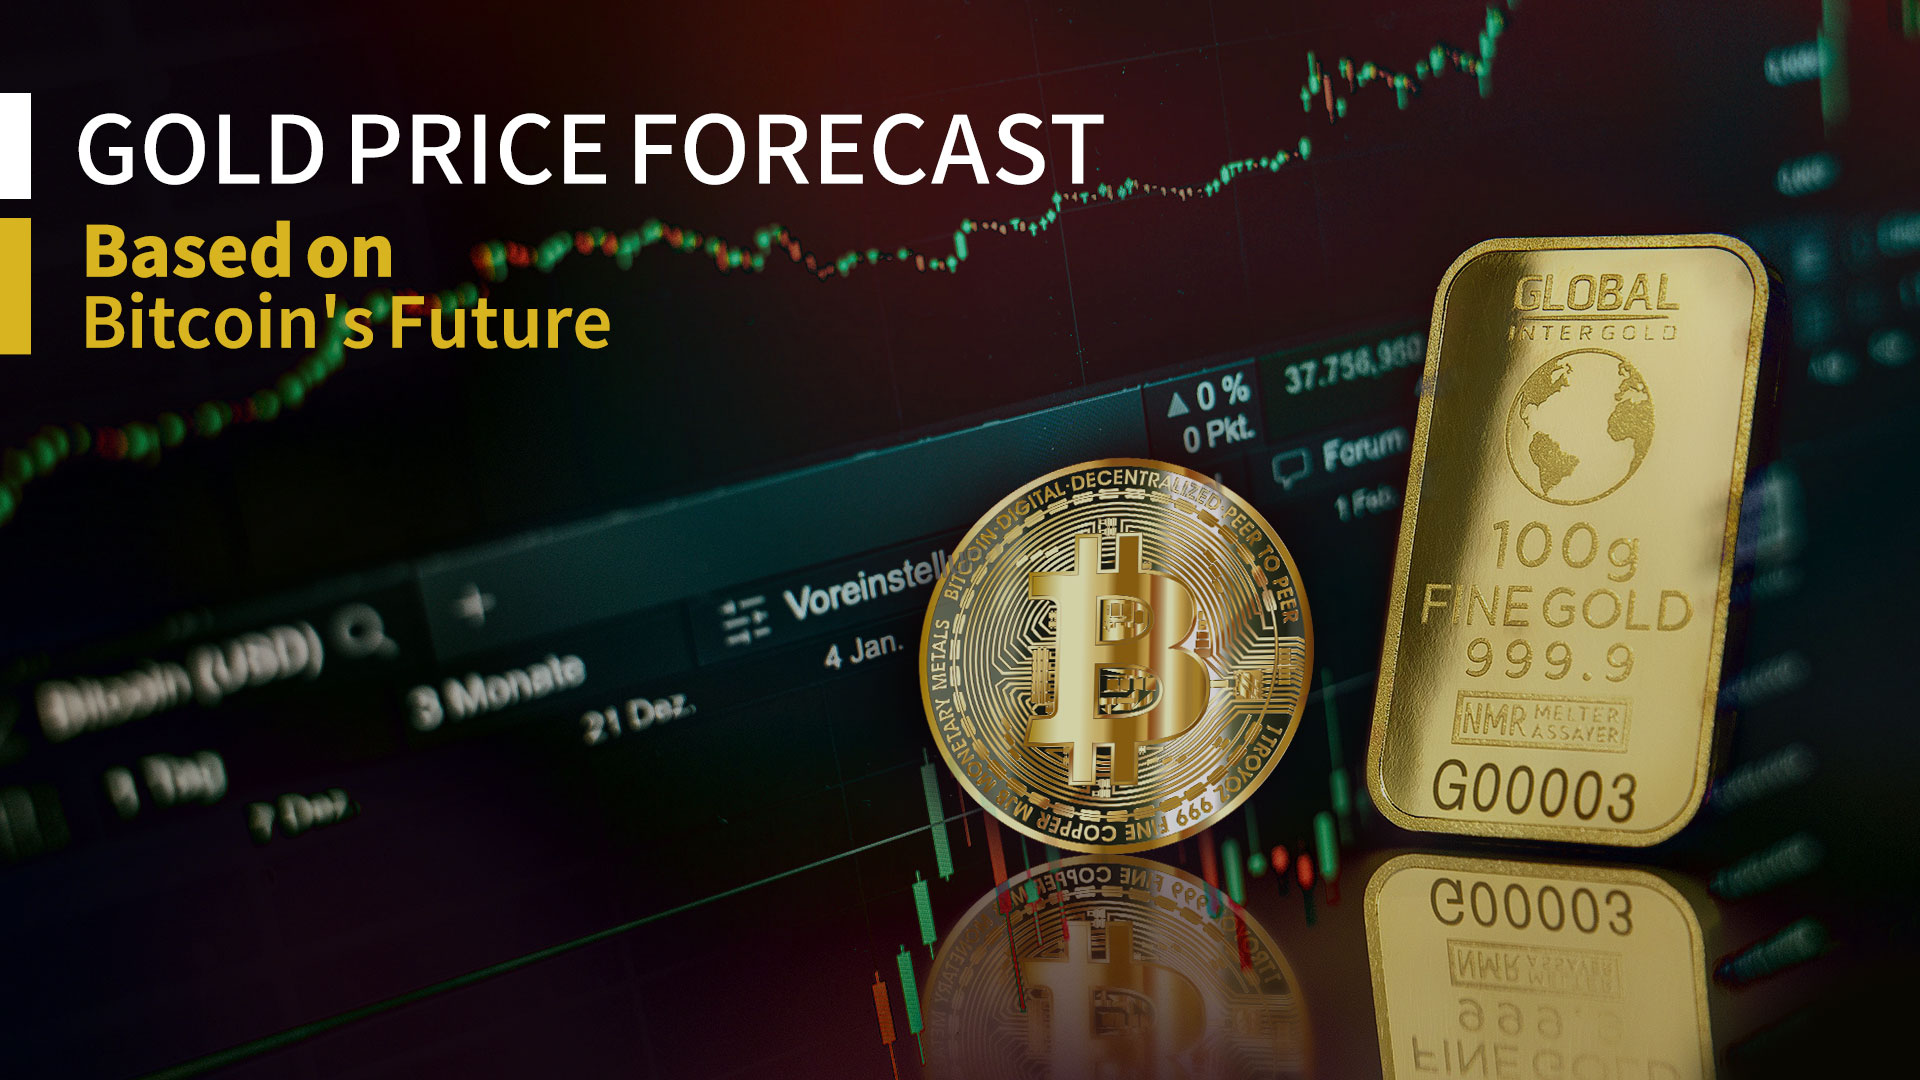 Gold Price Forecast Based on Bitcoin’s Future